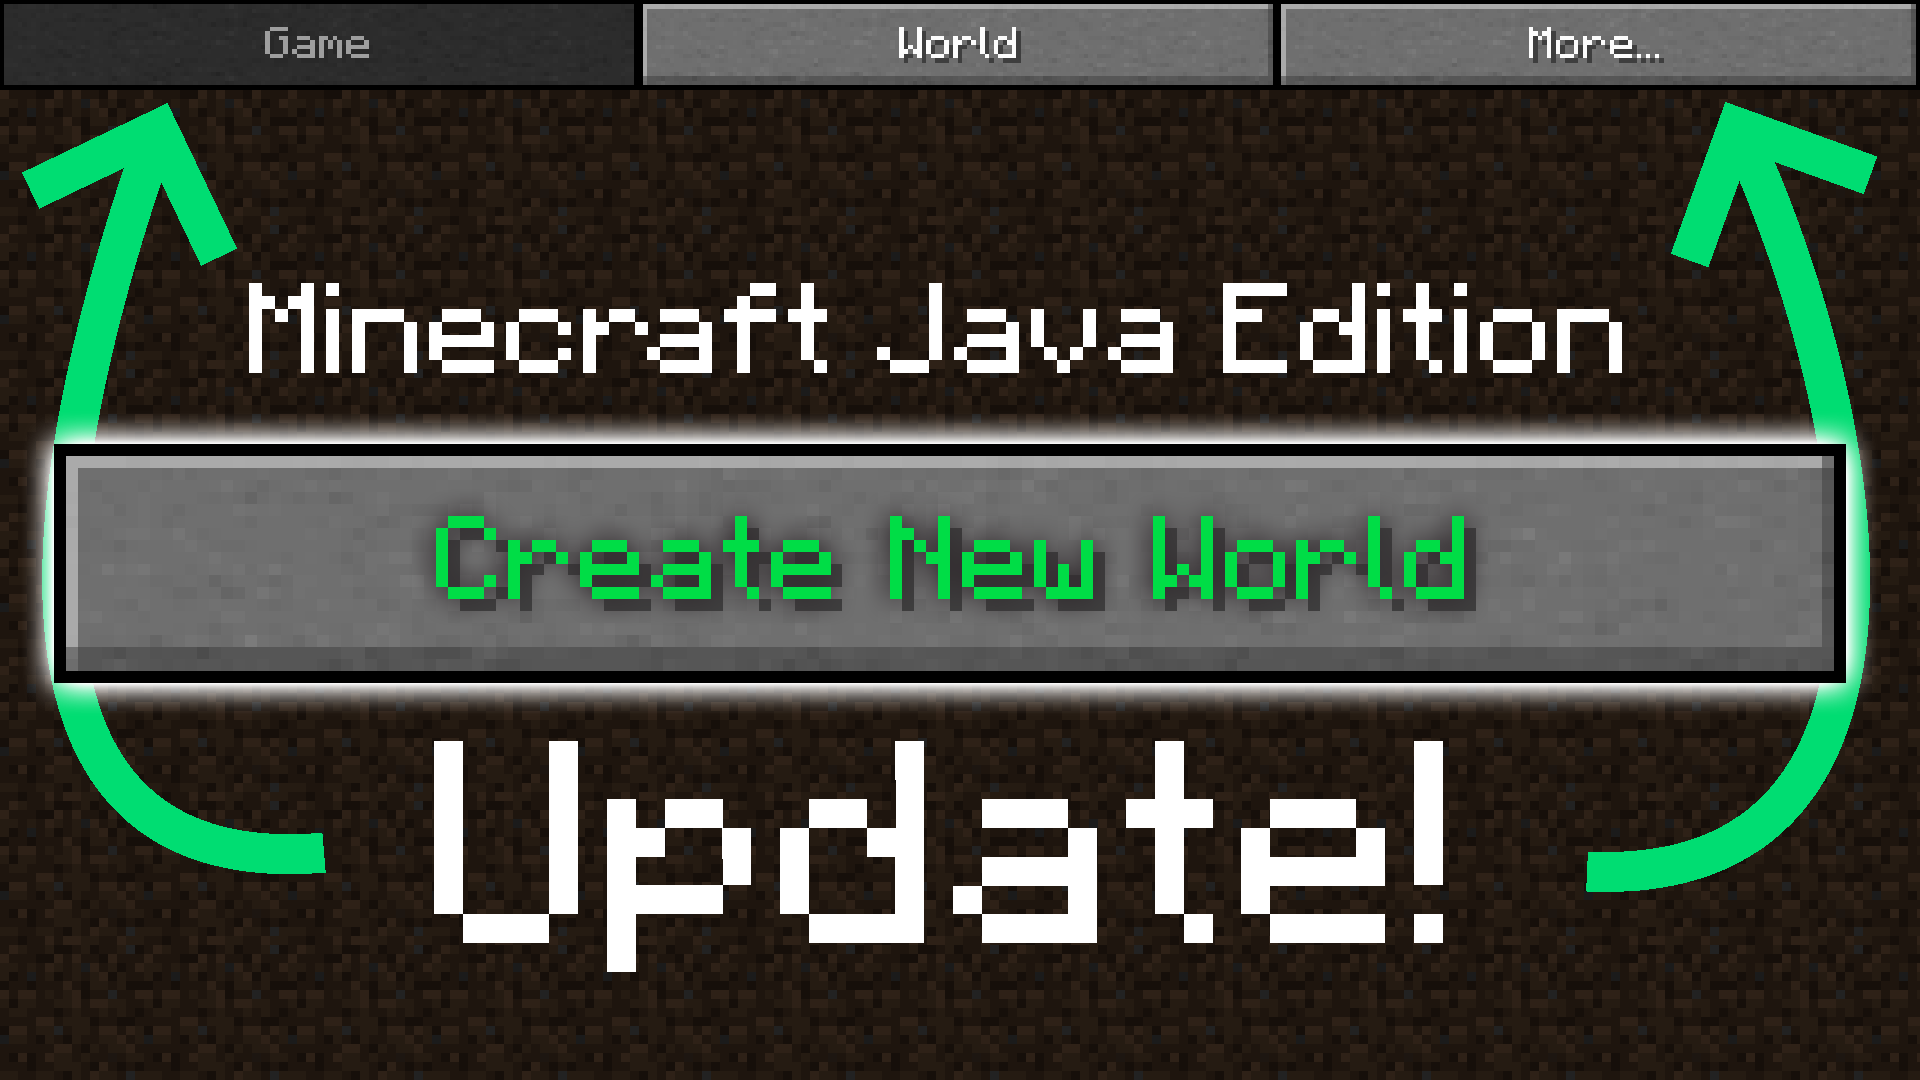 All About Minecraft's Upcoming “Create New World” Changes